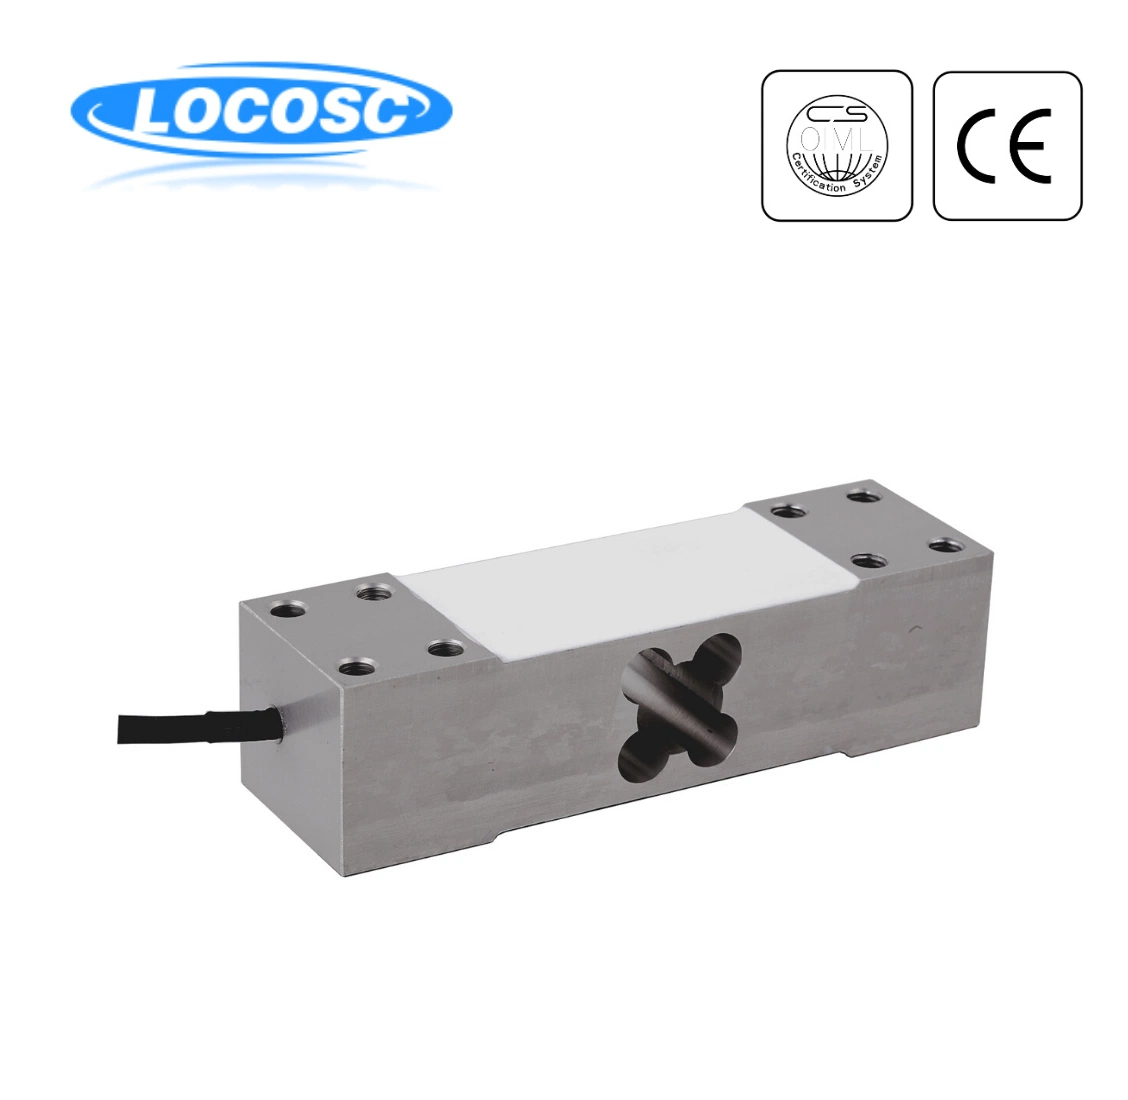 50kg 100kg 200kg 500kg High Precision Zemic L6e Aluminum IP67 Single Point Weighing Load Cell